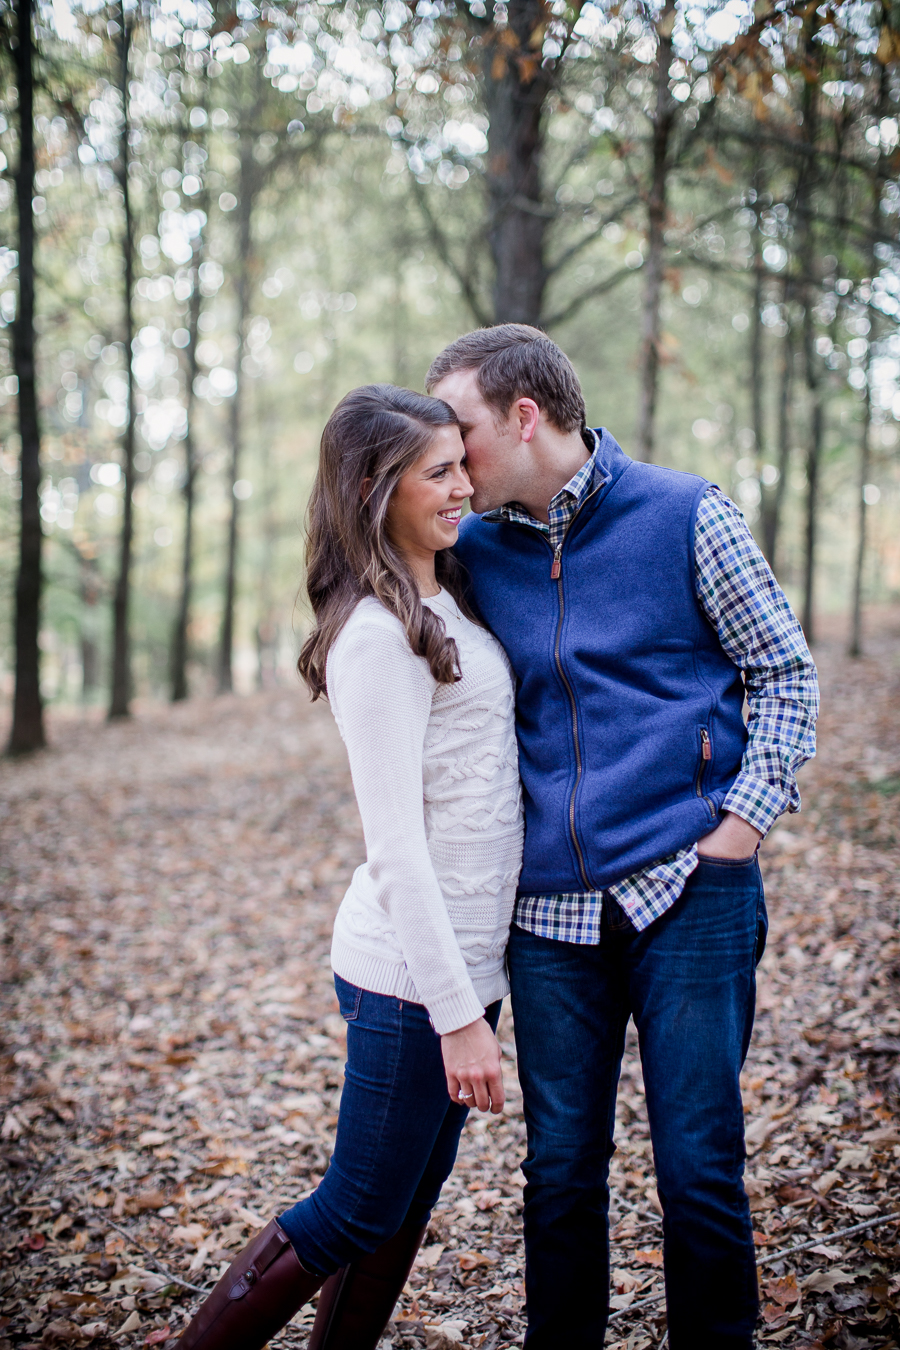 Whispering in her ear by Knoxville Wedding Photographer, Amanda May Photos.